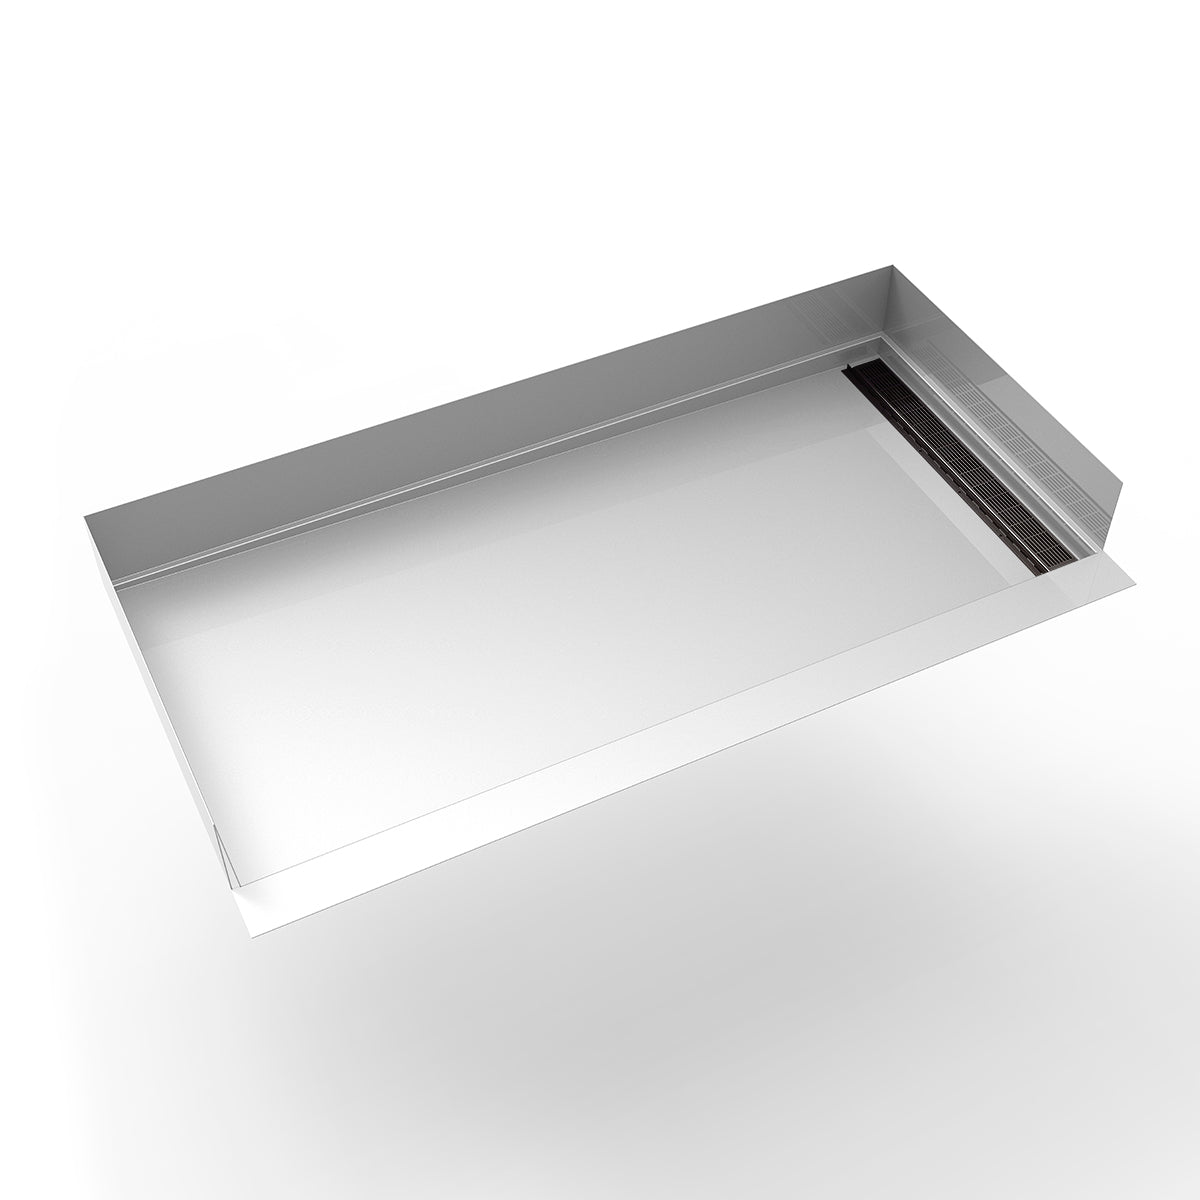 Infinity Drain 30"x 60" Curbless Stainless Steel Shower Base with Right Wall Slotted Pattern Linear Drain location